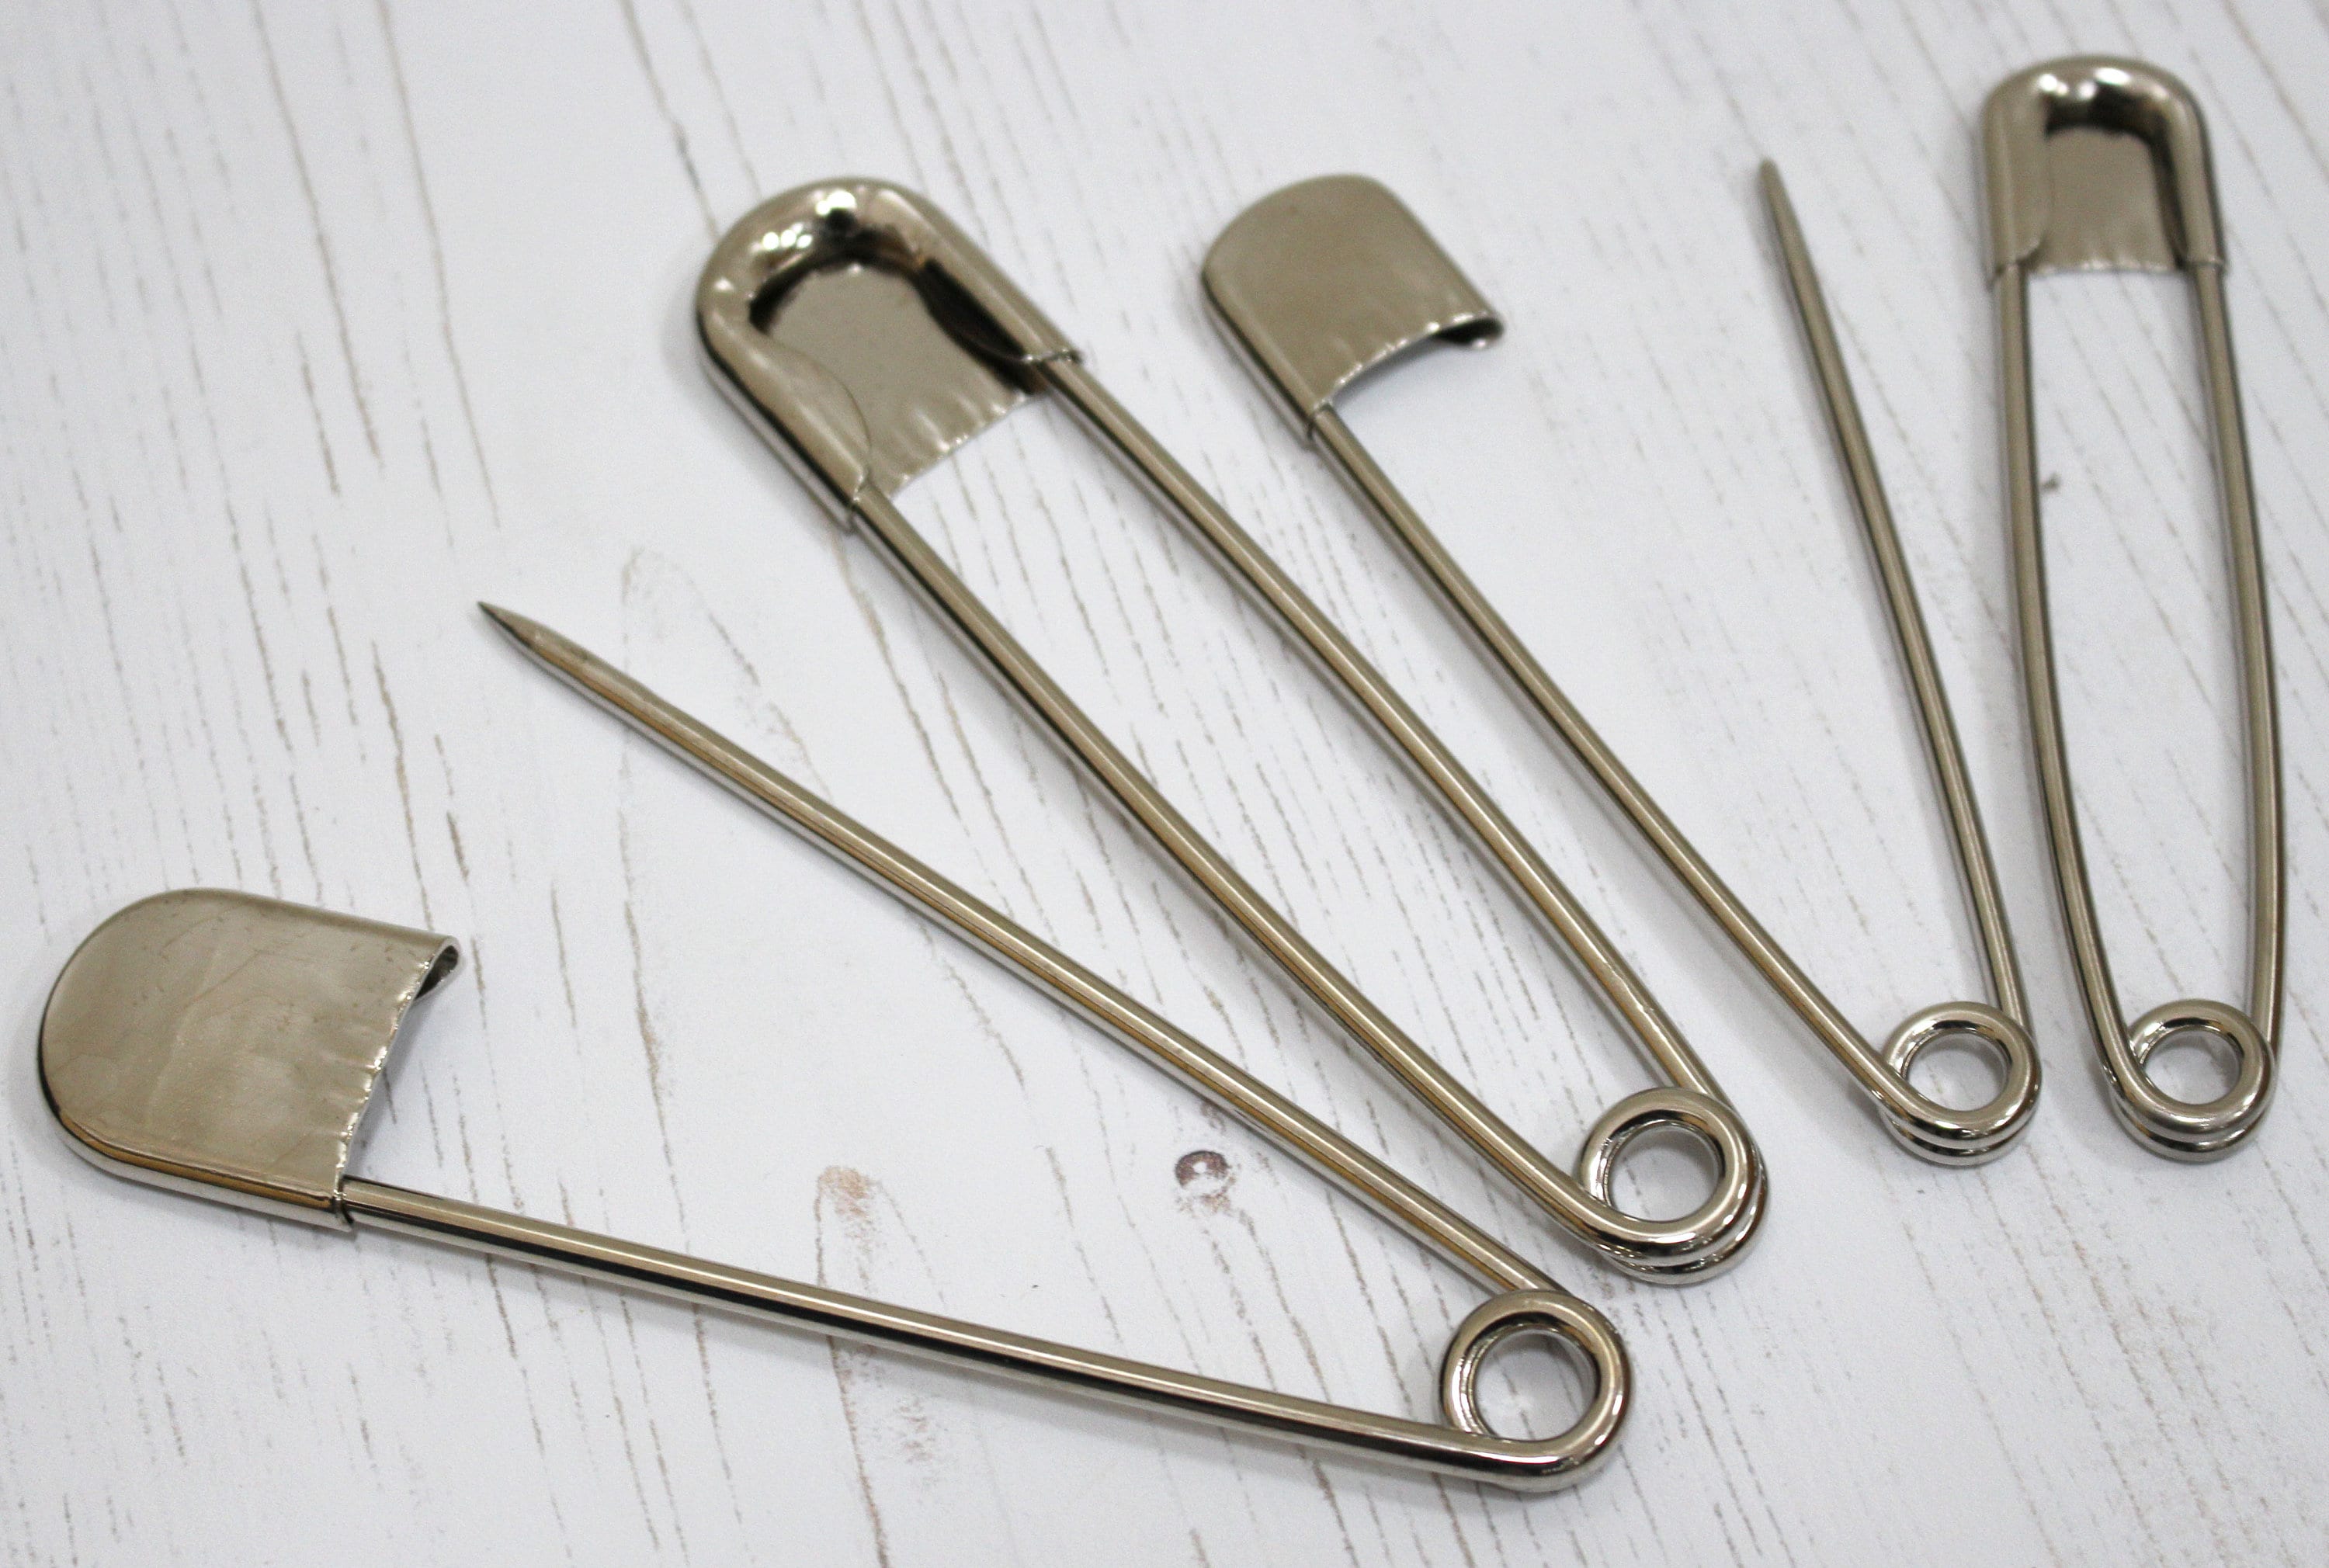 128mm Giant Safety Pin Big Over Sized Laundry Pins Kilt Pins Brooch Pin  Back Safety Pin